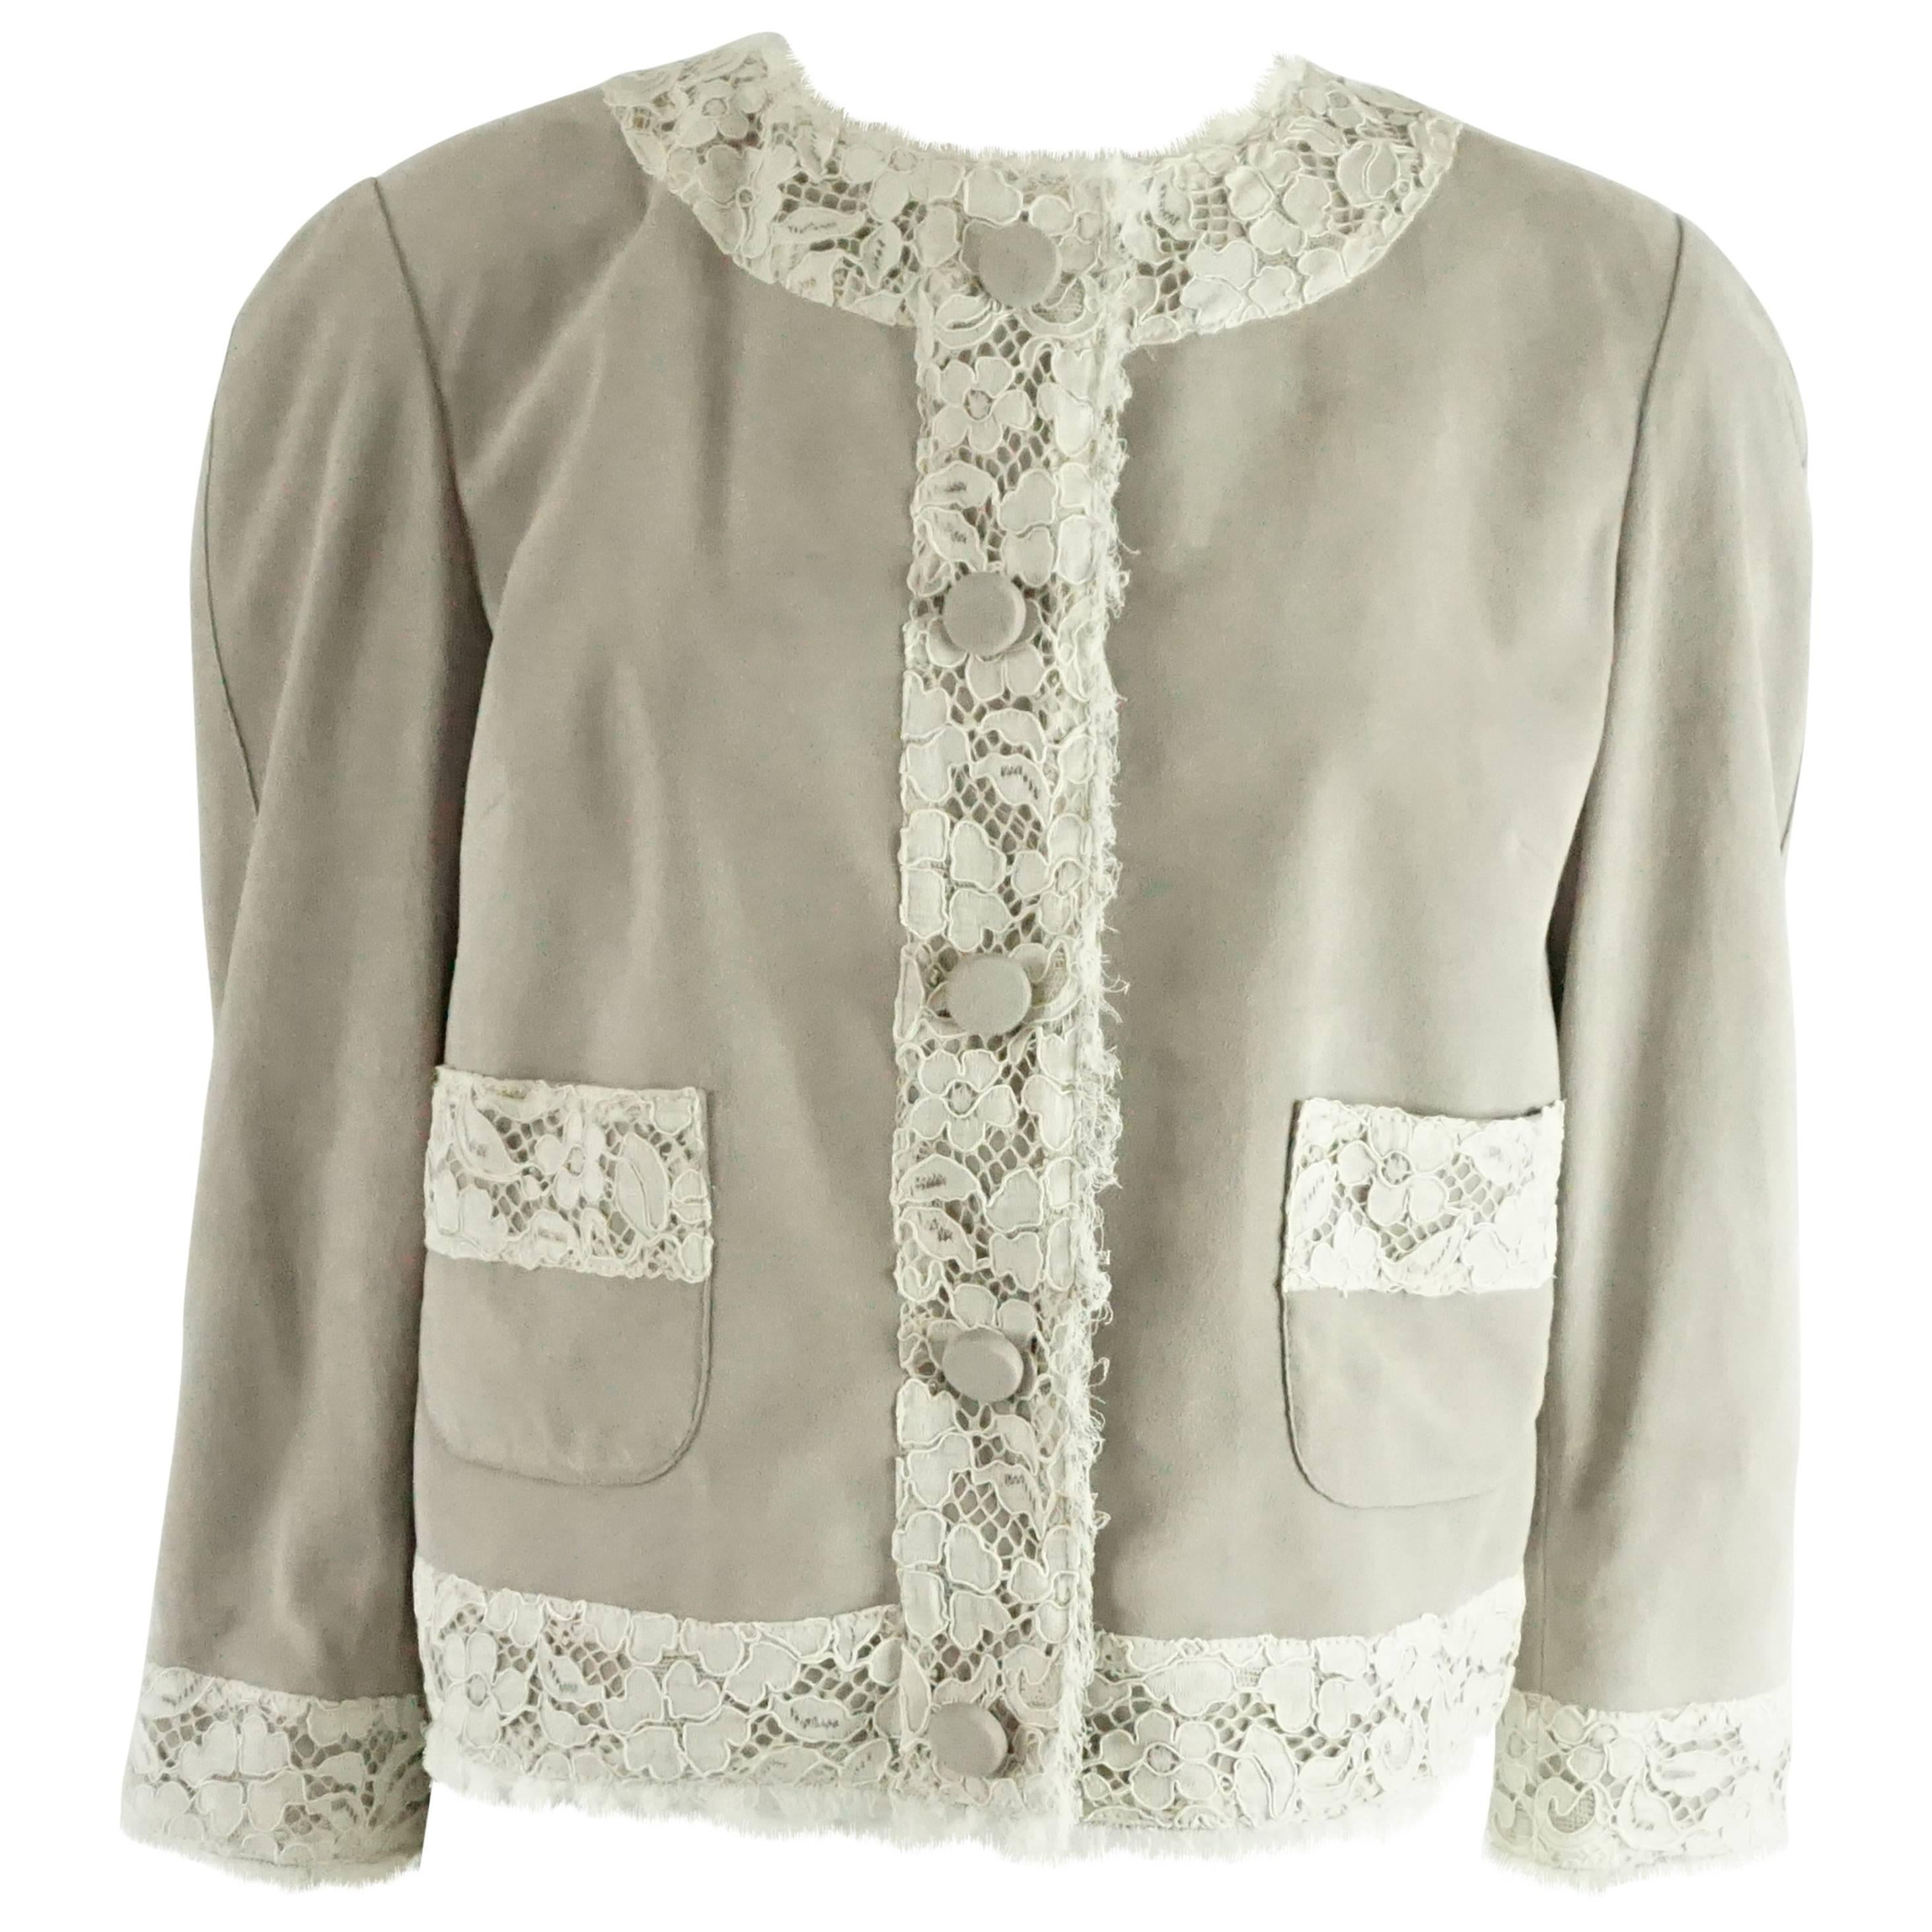 Dolce & Gabbana Gray Suede with Ivory Lace Trim Jacket - Size 42 Circa 2000 For Sale